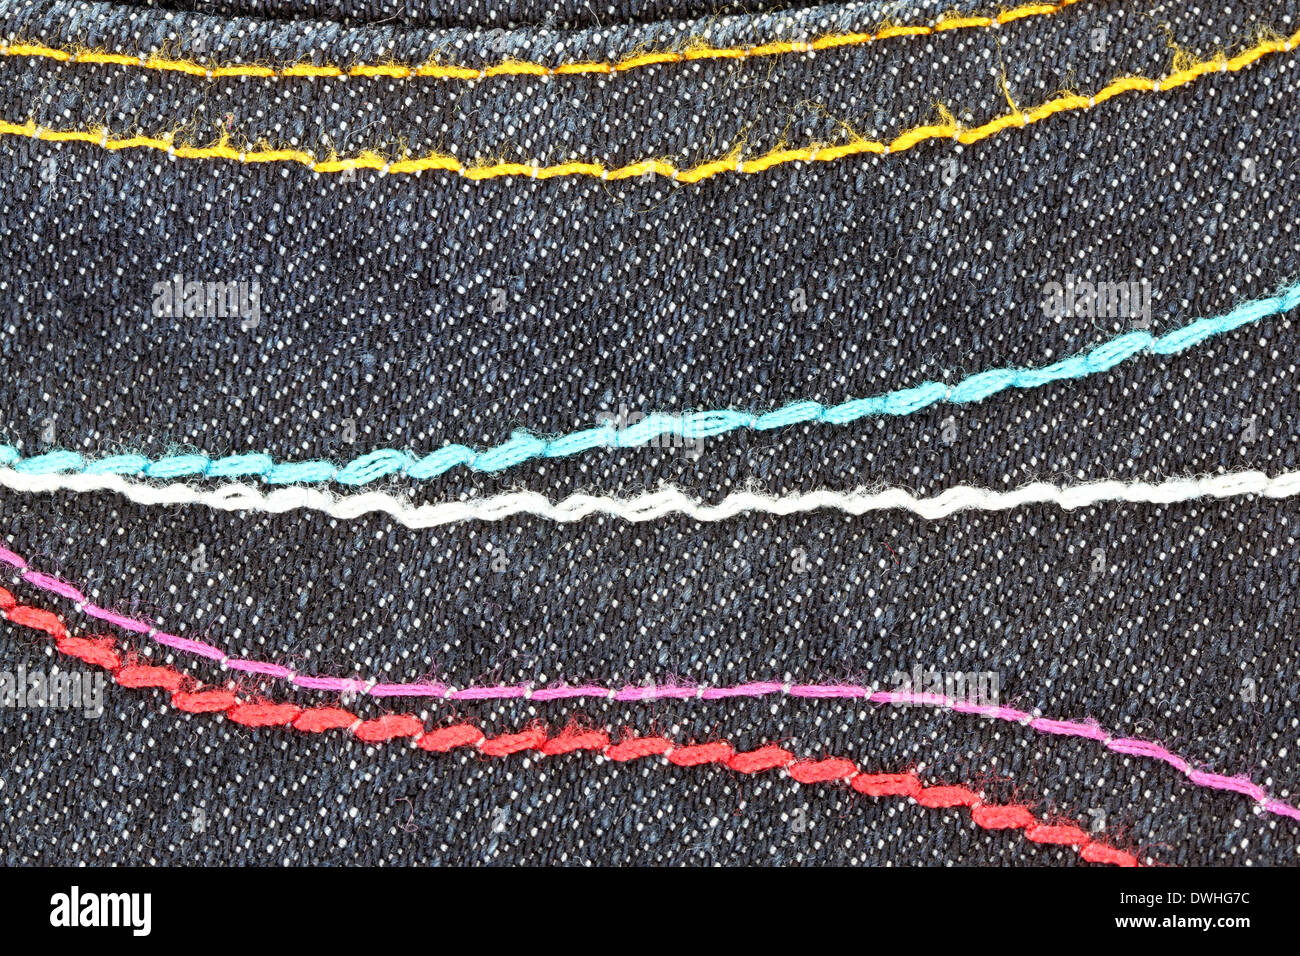 Patterns of yarn on the back of black jeans for background. Stock Photo